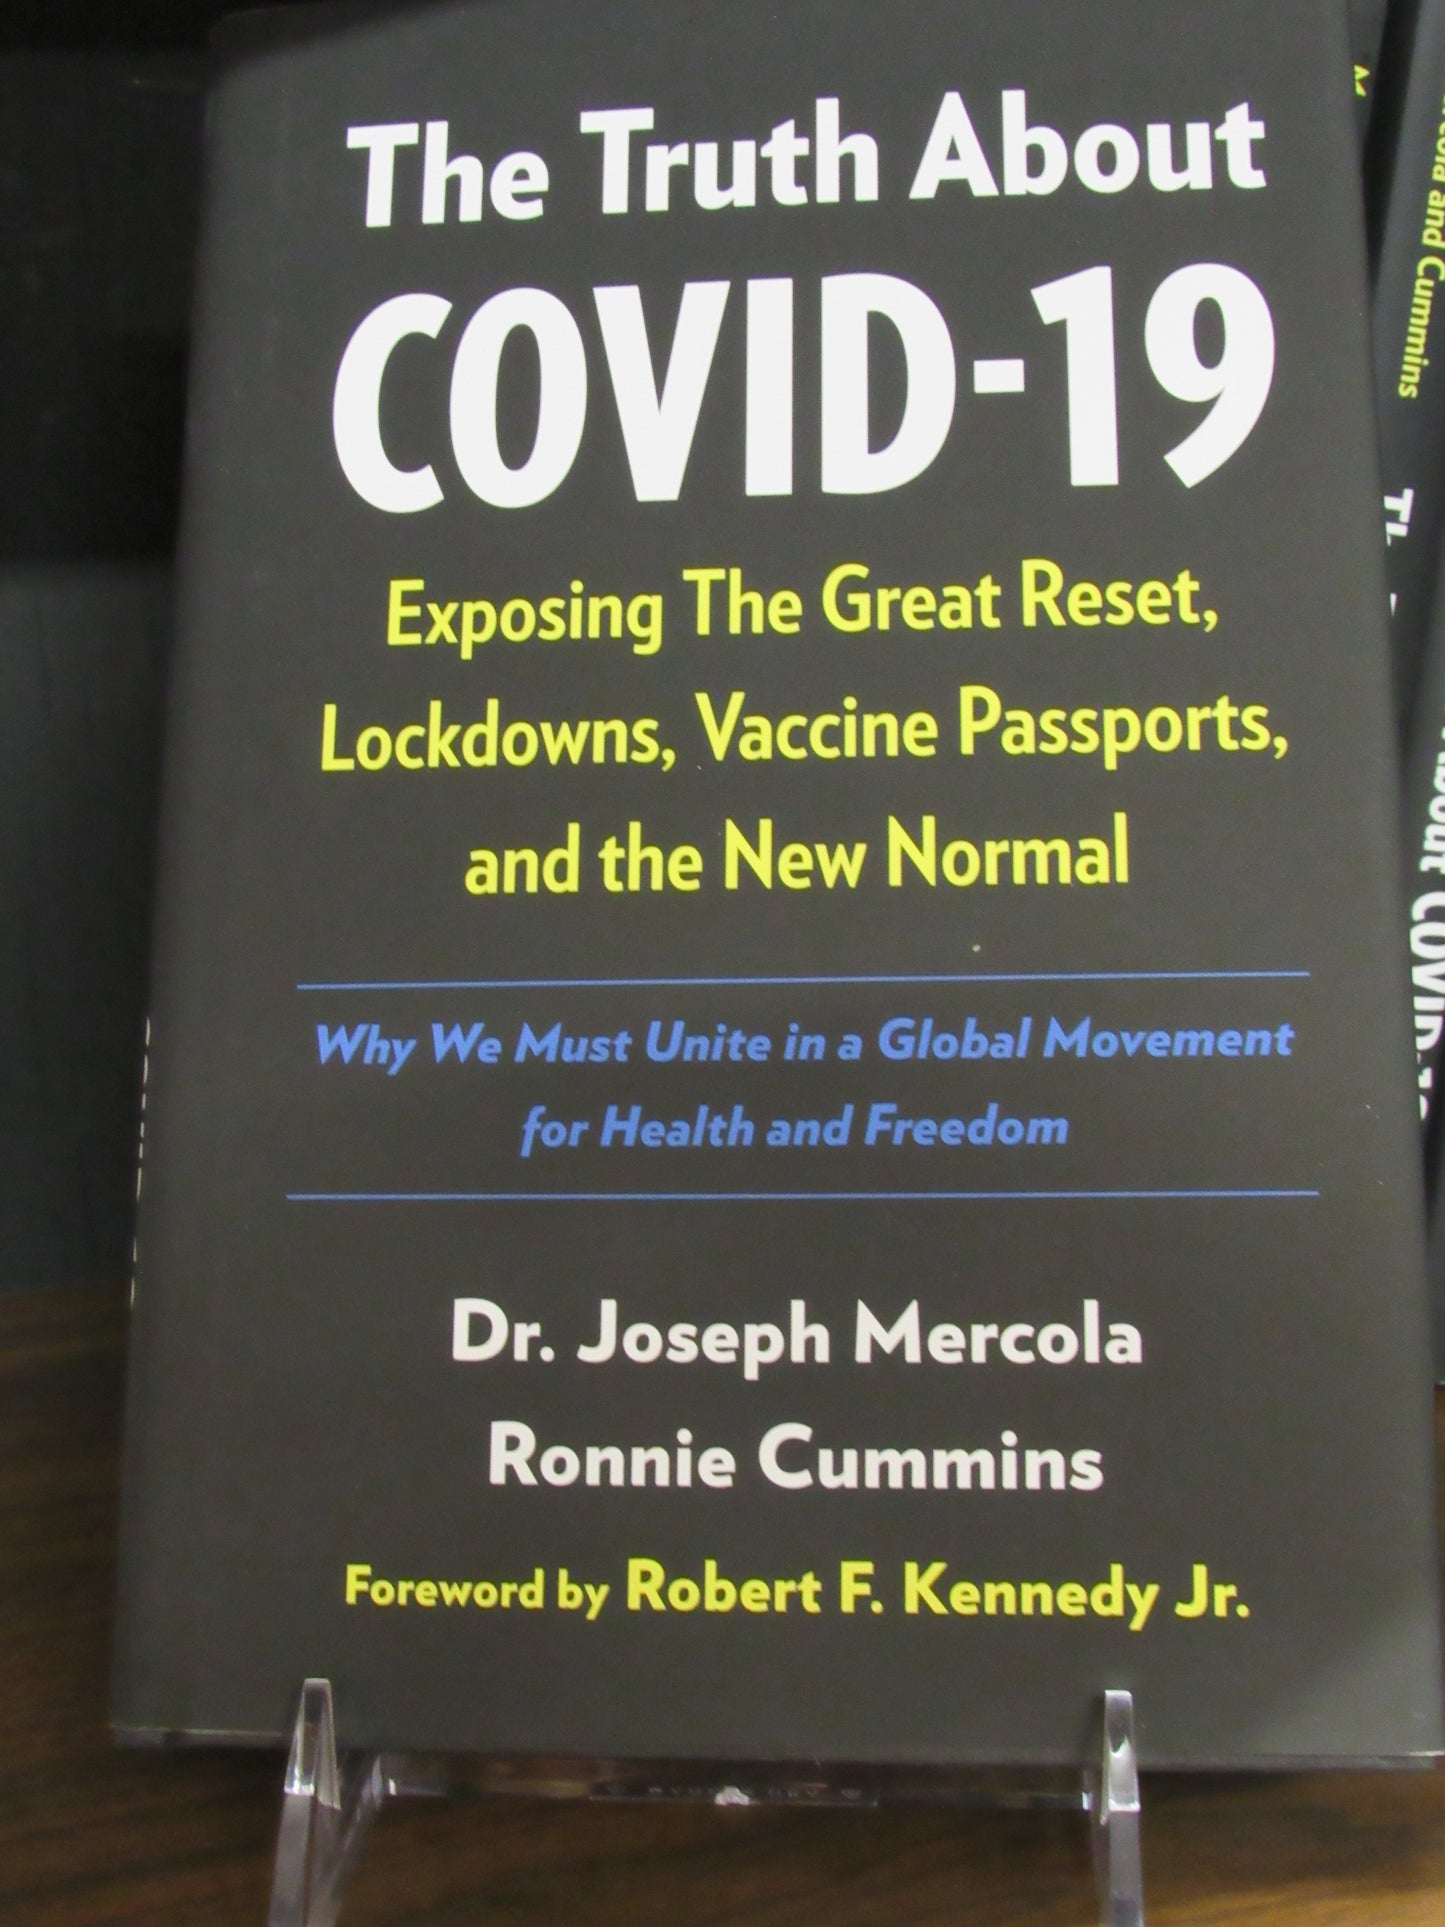 The Truth About Covid-19 by Dr. Joseph Mercola and Robbie Cummins